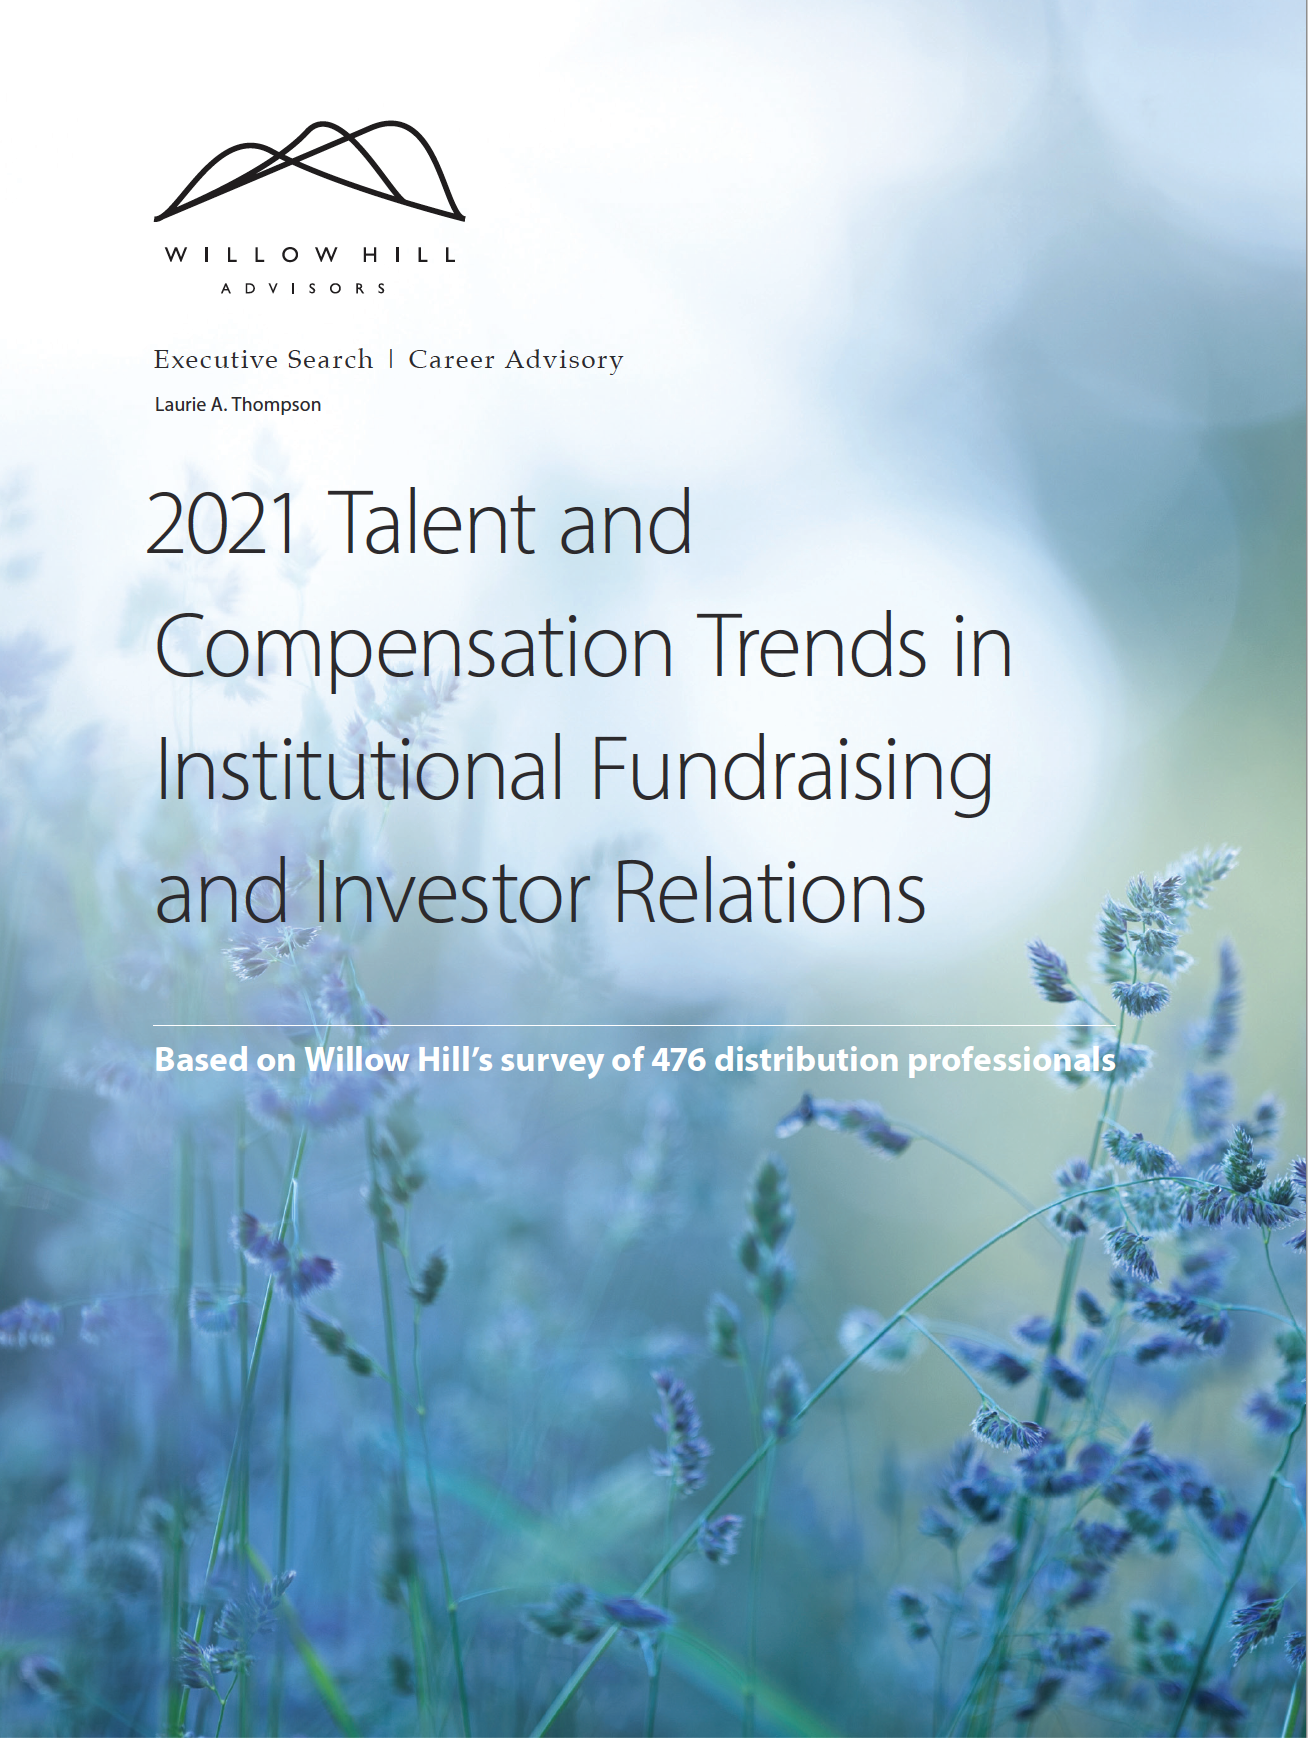 2021 Talent and Compensation Trends in Institutional Fundraising and Investor Relations